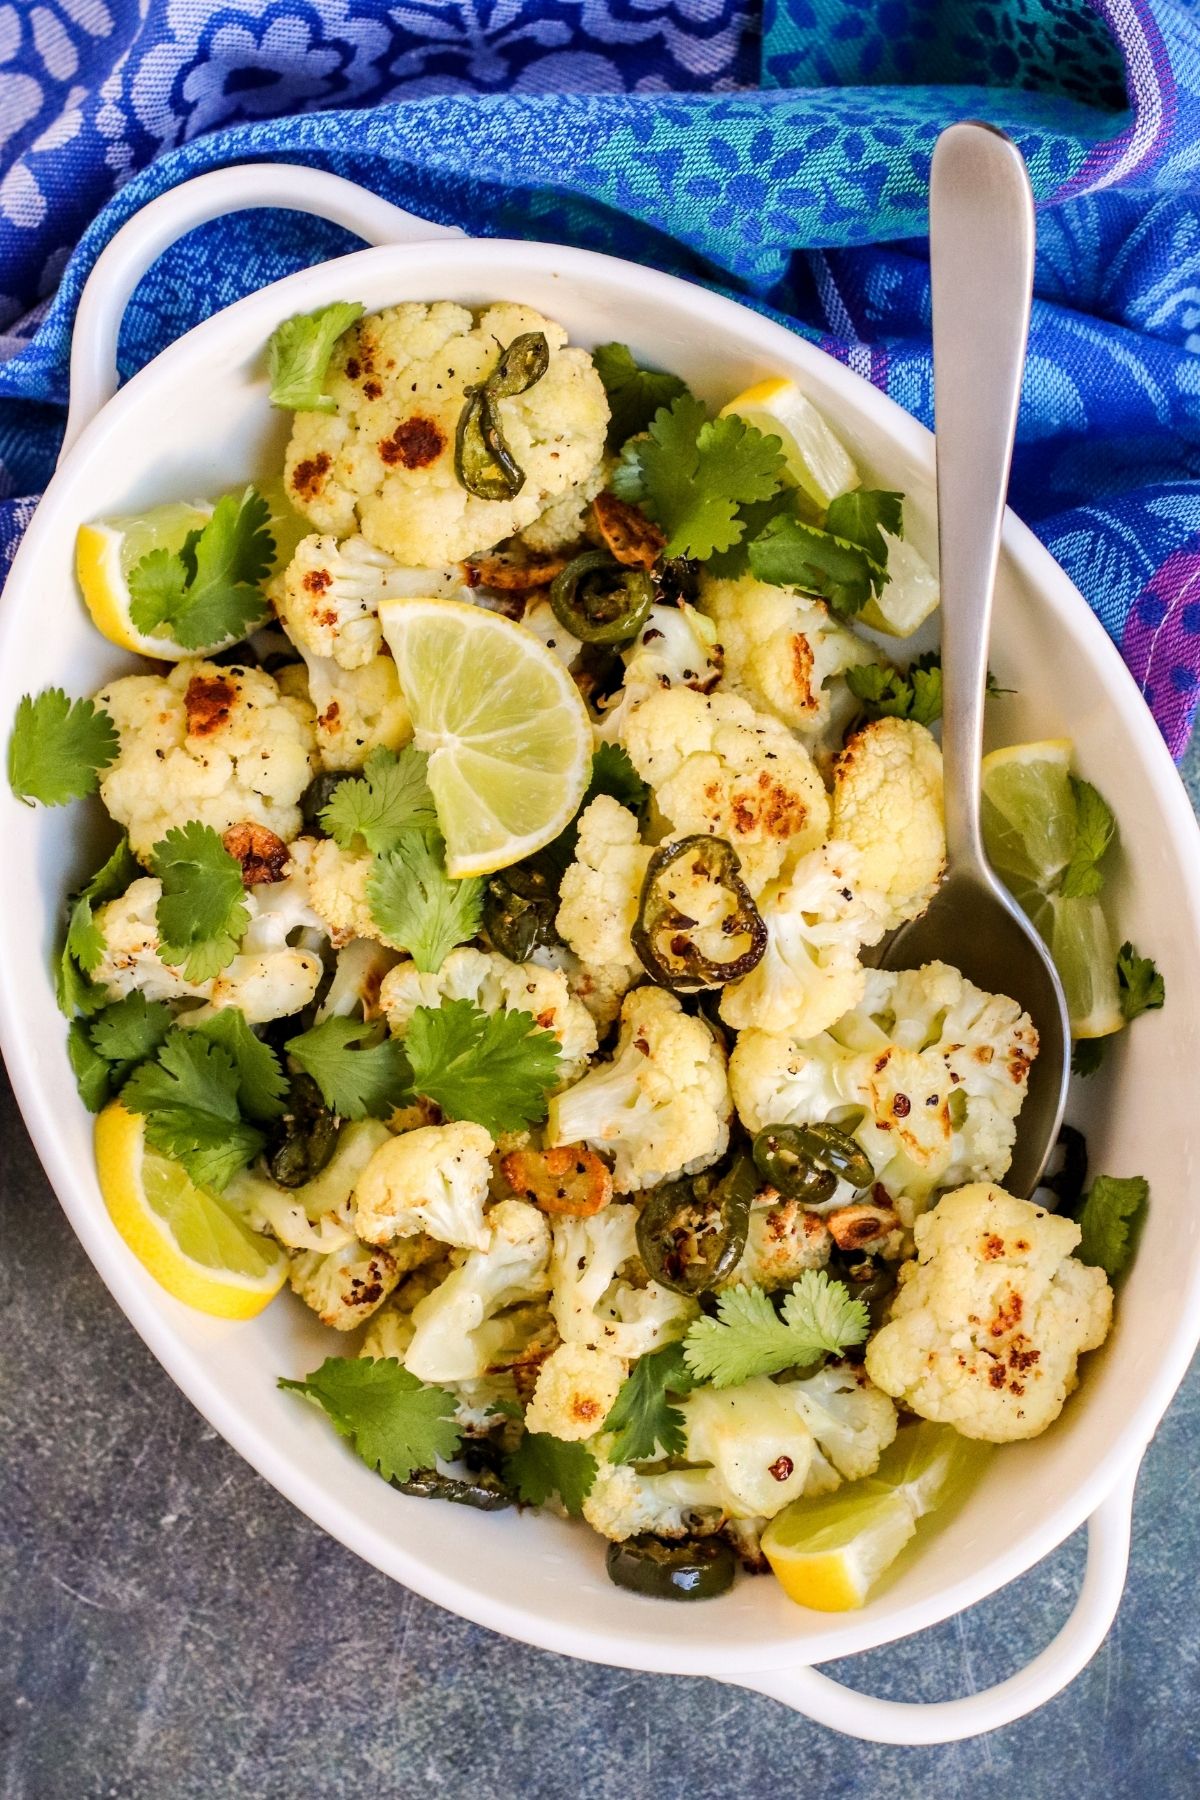 Spicy roasted cauliflower garnished with slices of lime and fresh cilantro